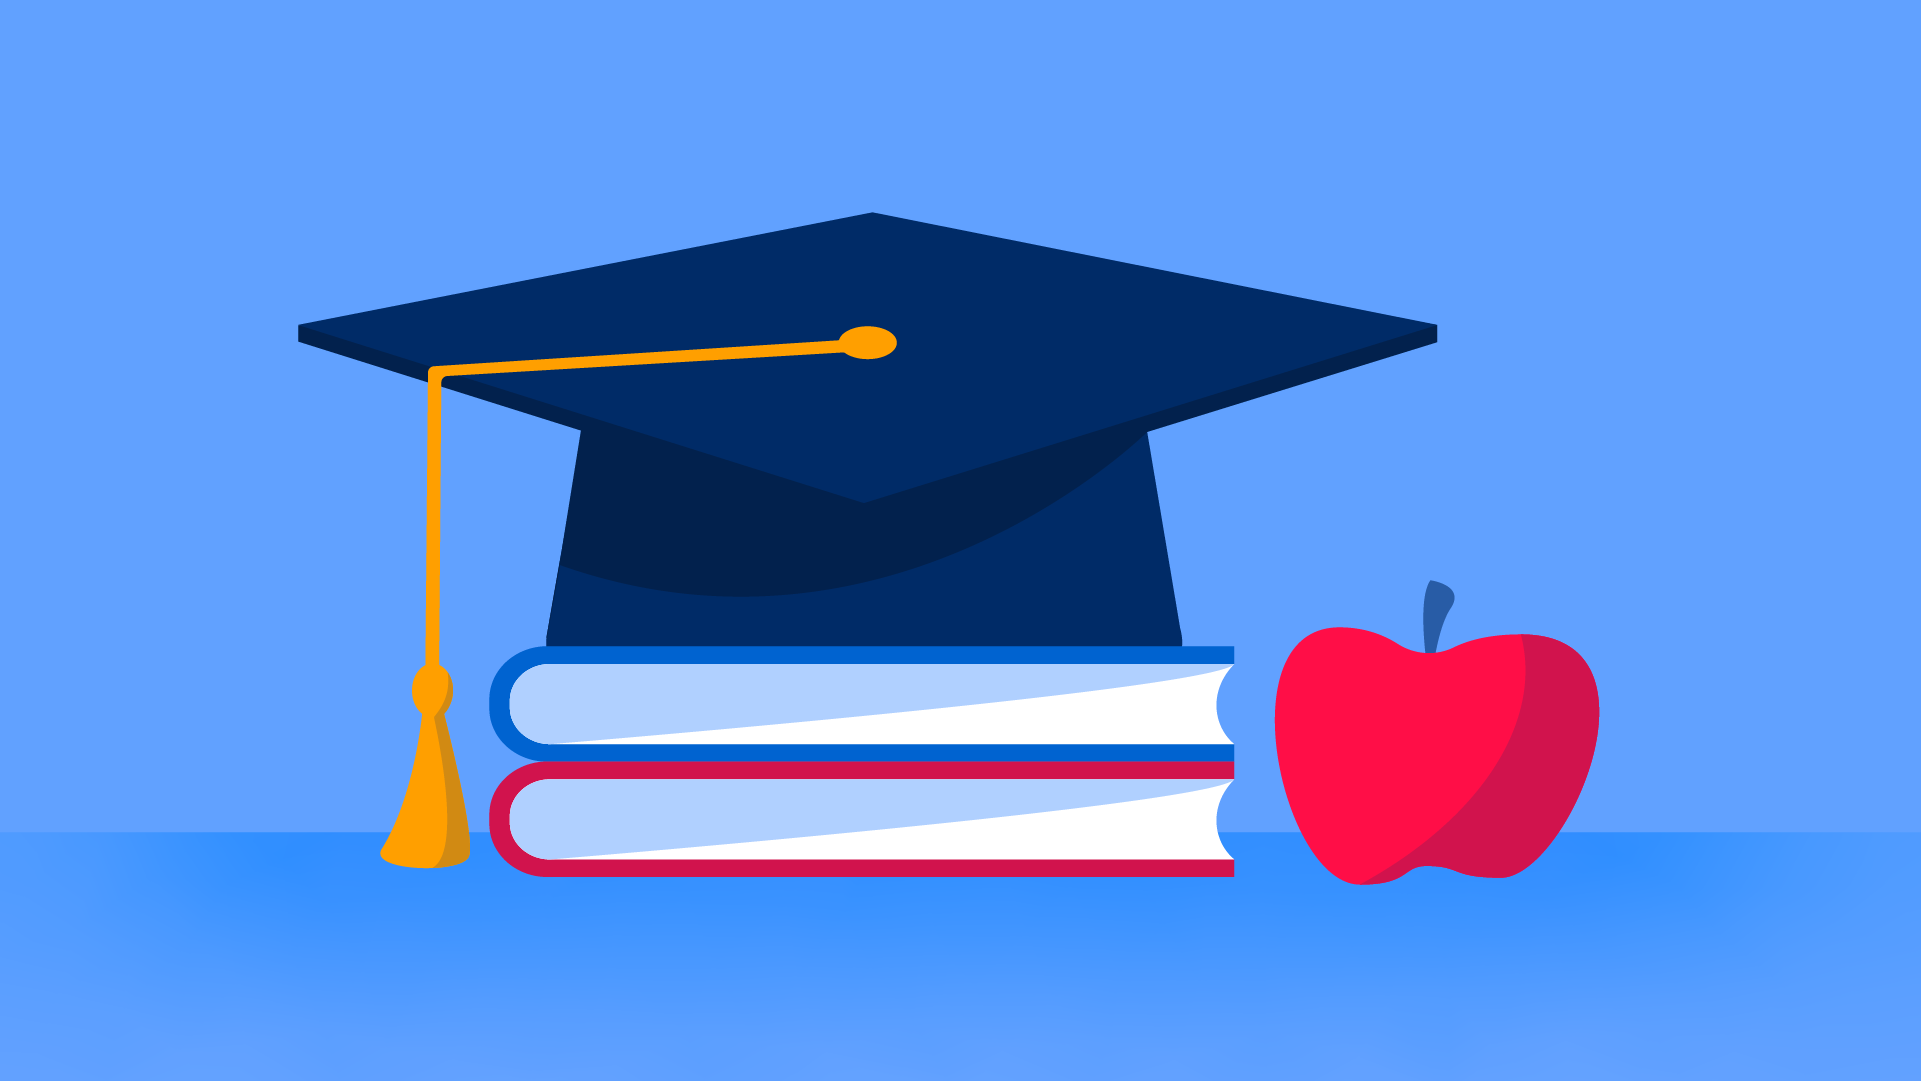 graduation cap sitting on stack of books next to an apple